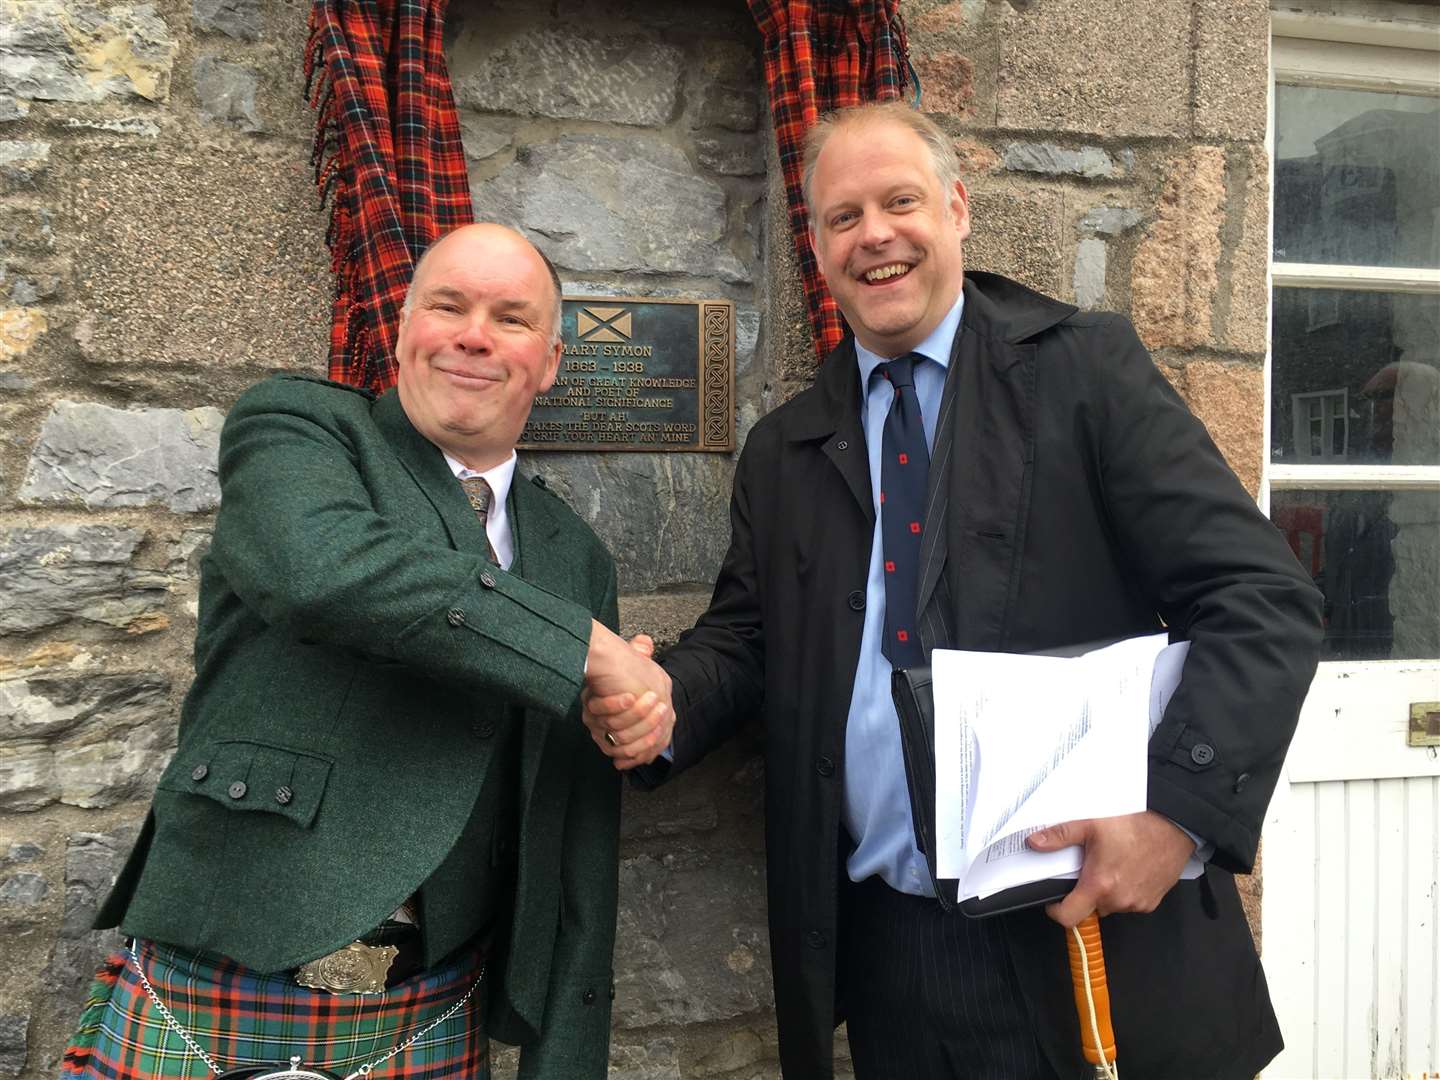 Neil McLennan , chairman of Scotland's War Poets Memorial committee, and Jim Nicol of Dufftown Community Council at the unveiling of the Mary Symon plaque as part of 2014-2018 commemorations.